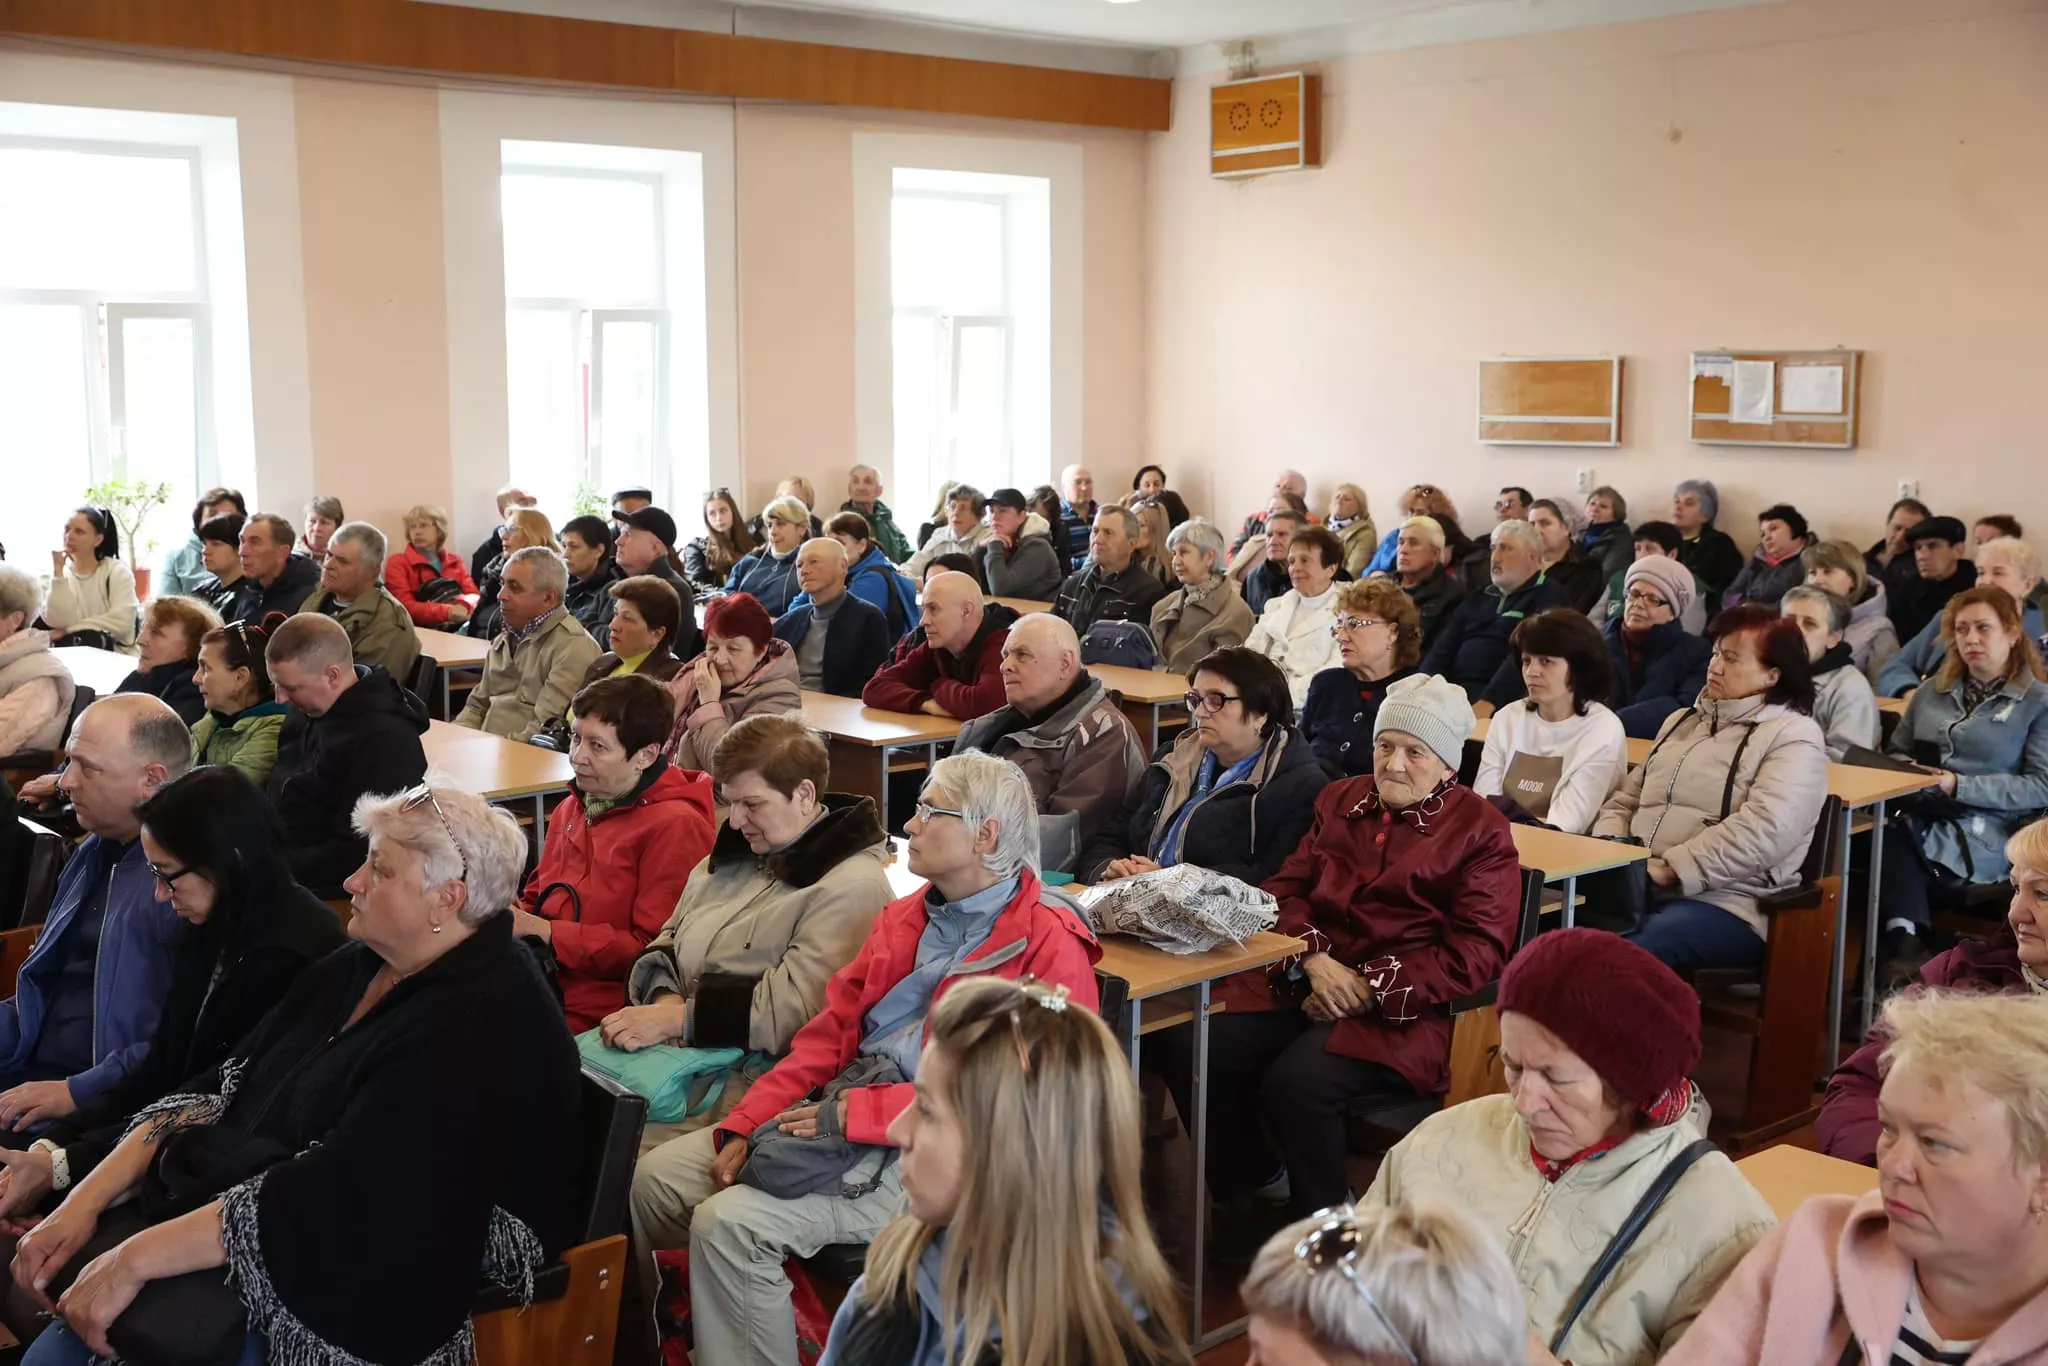 The authorities and displaced persons worked together to find solutions to the problems